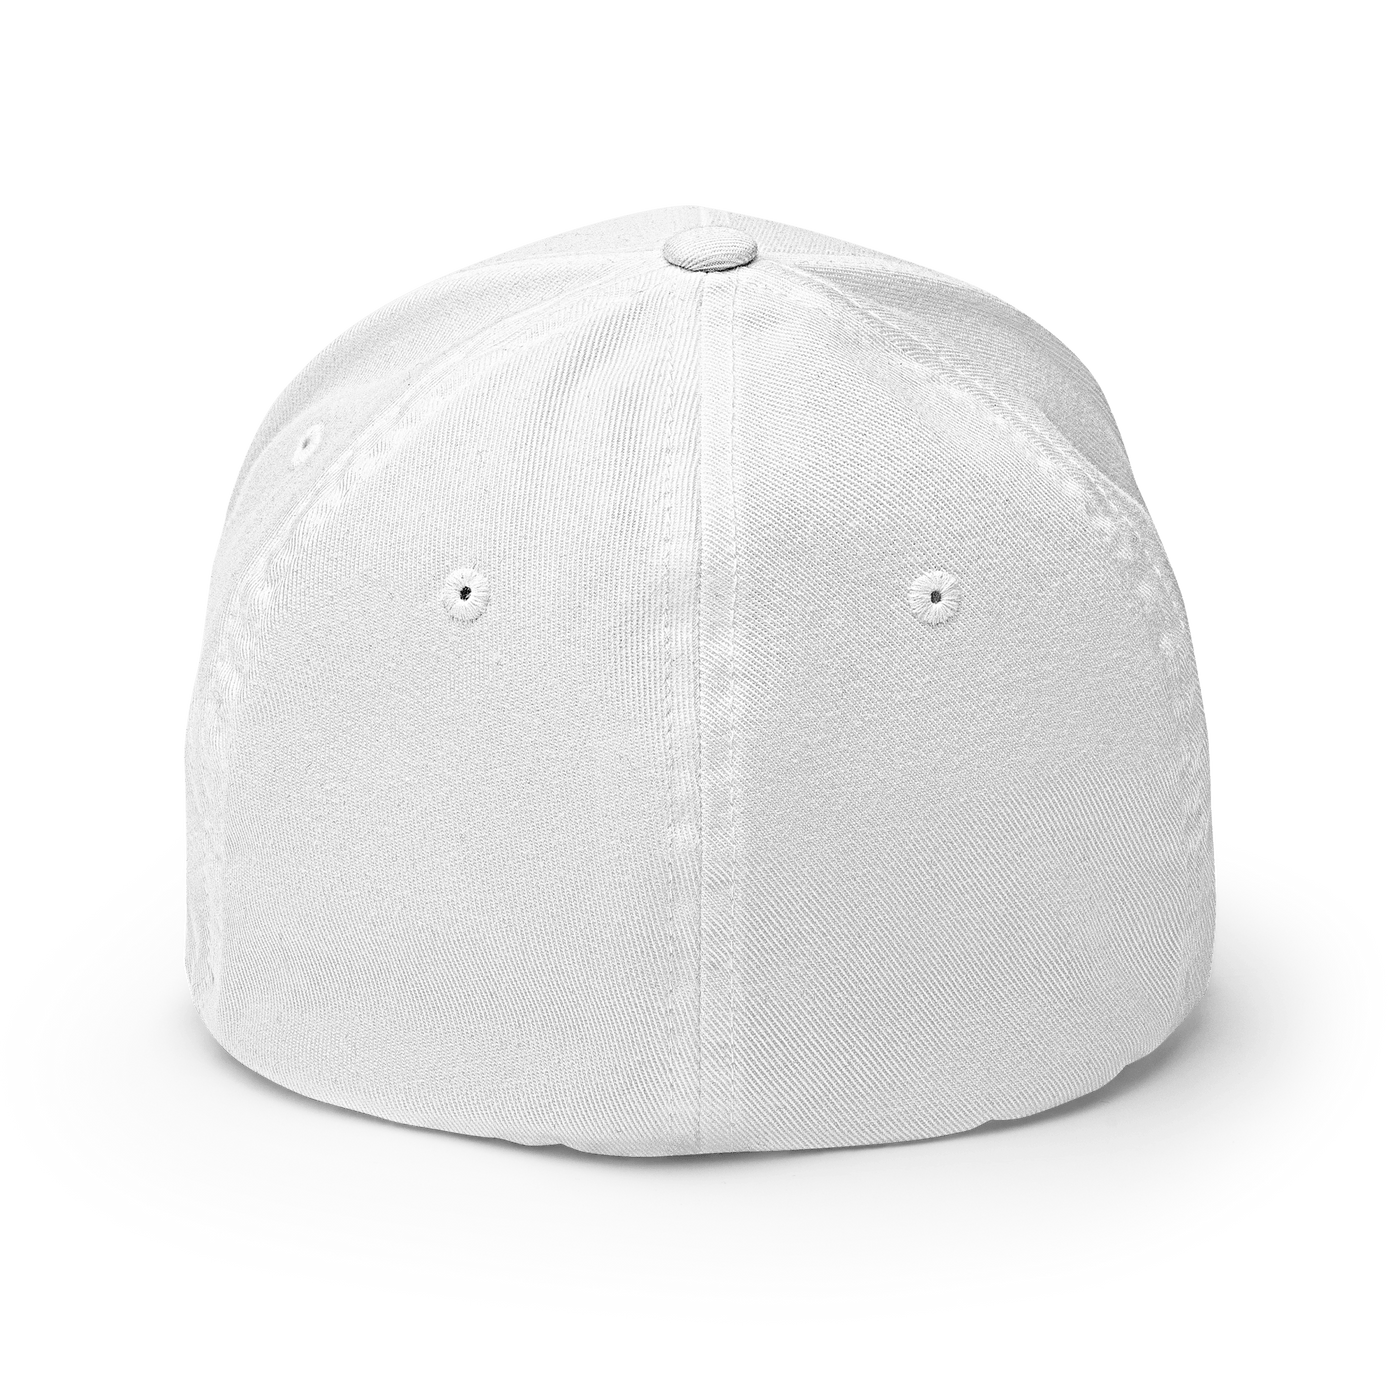 Thinking Flexfit Cap - White - S/M - Just Another Cap Store